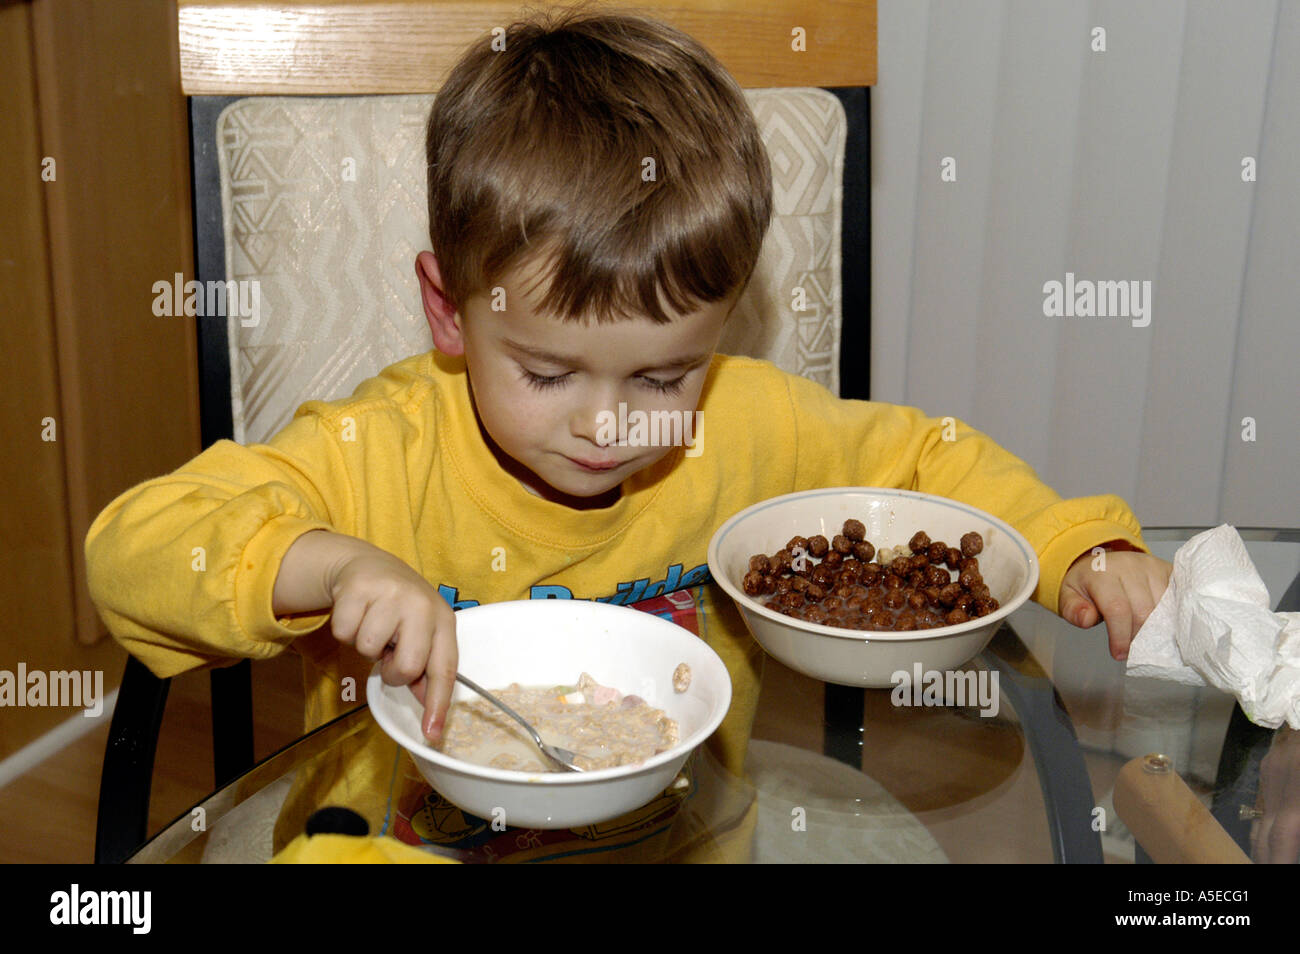 P12 018 3 Yr Old Boy Eating 2 bowls of cereal Stock Photo - Alamy